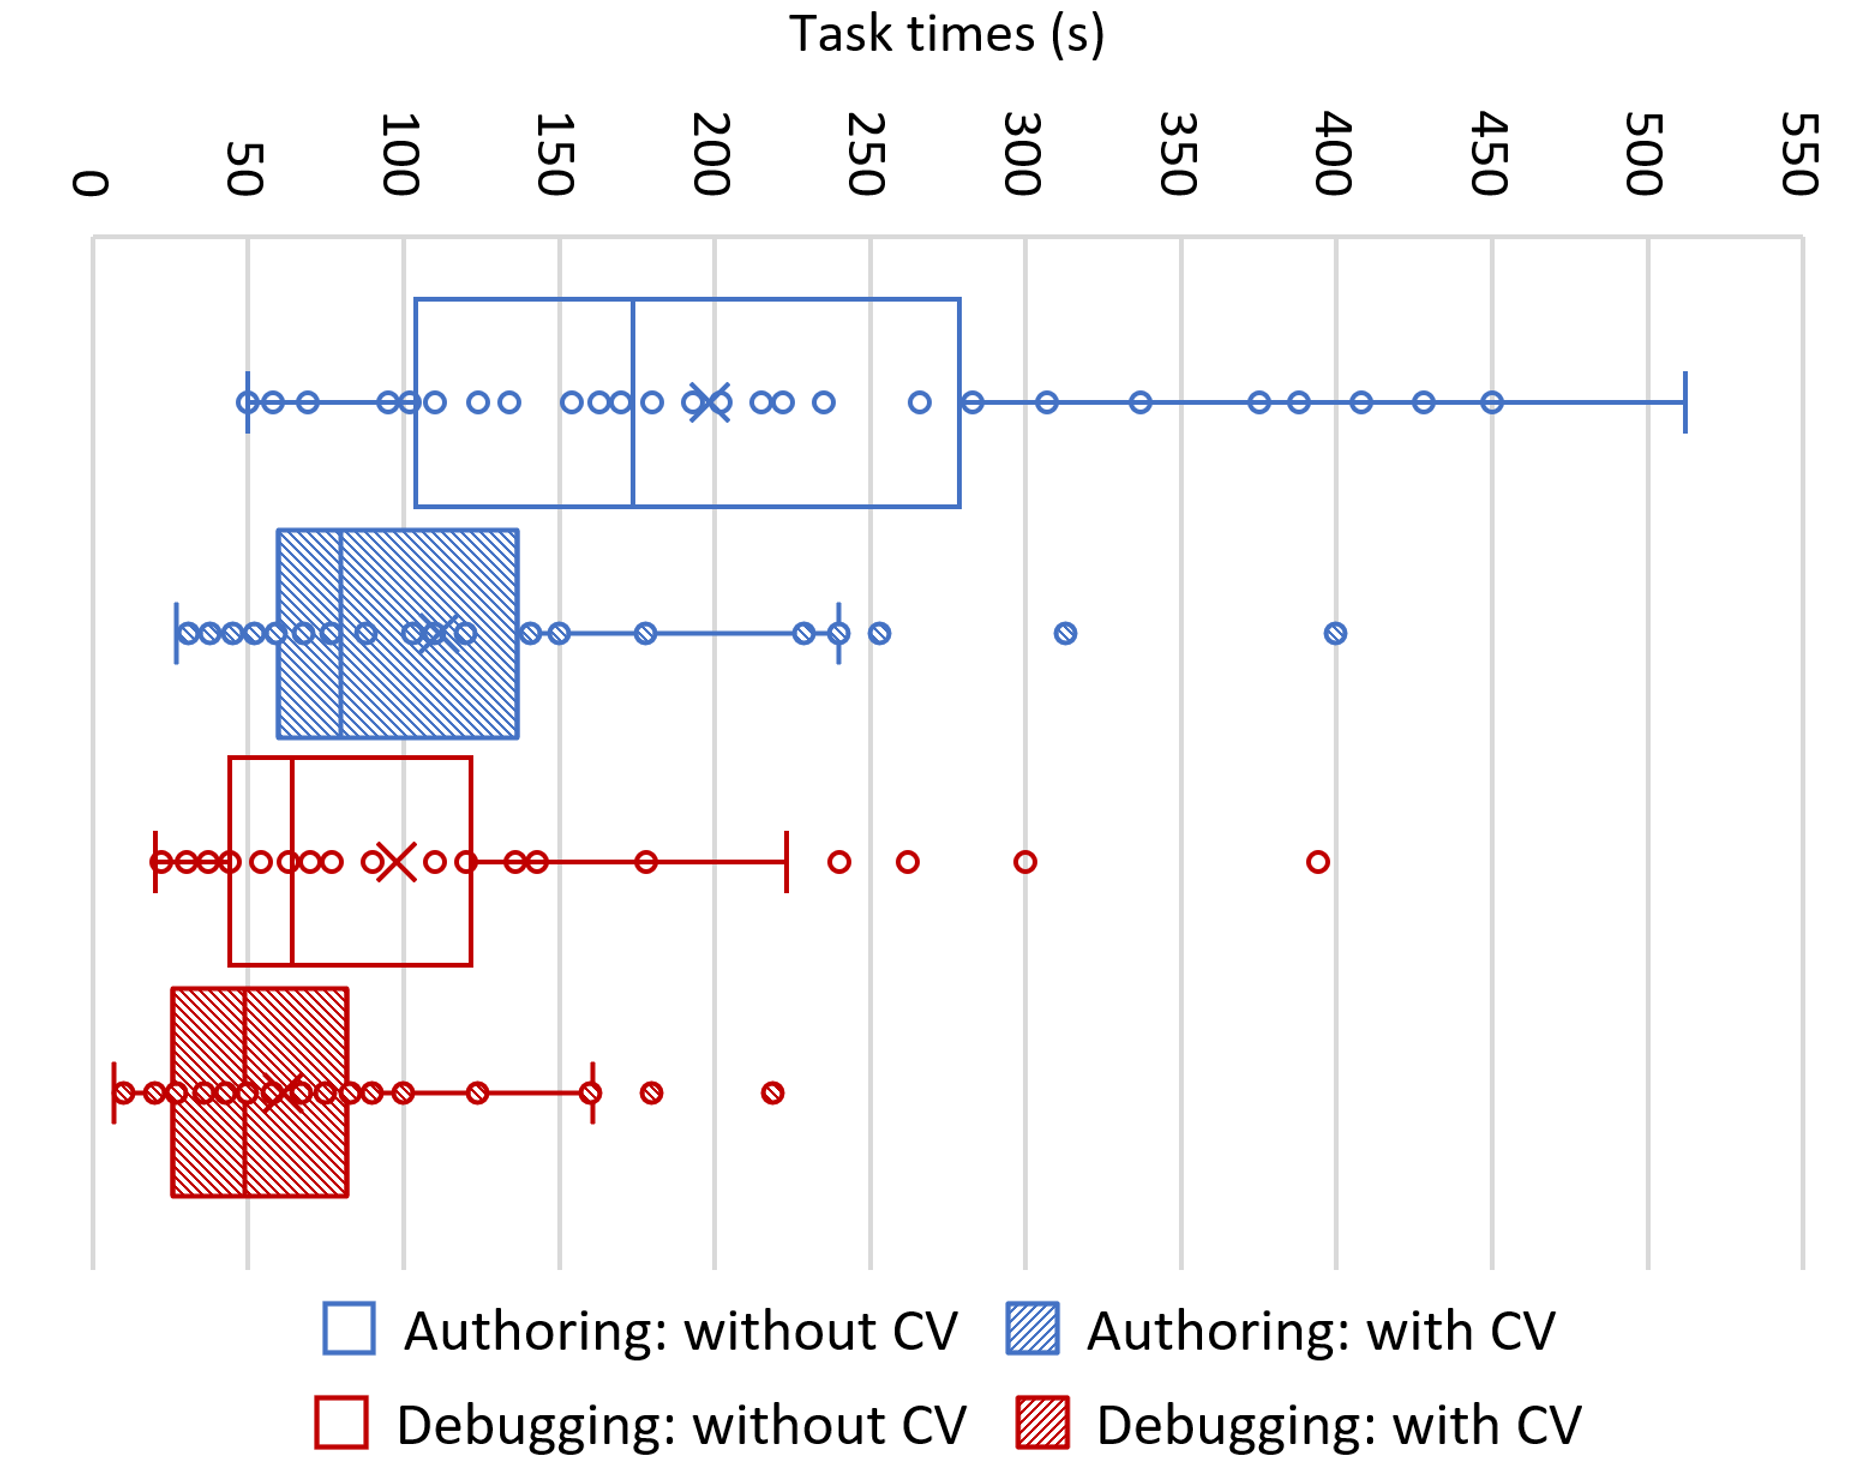 Task times with and without CV.